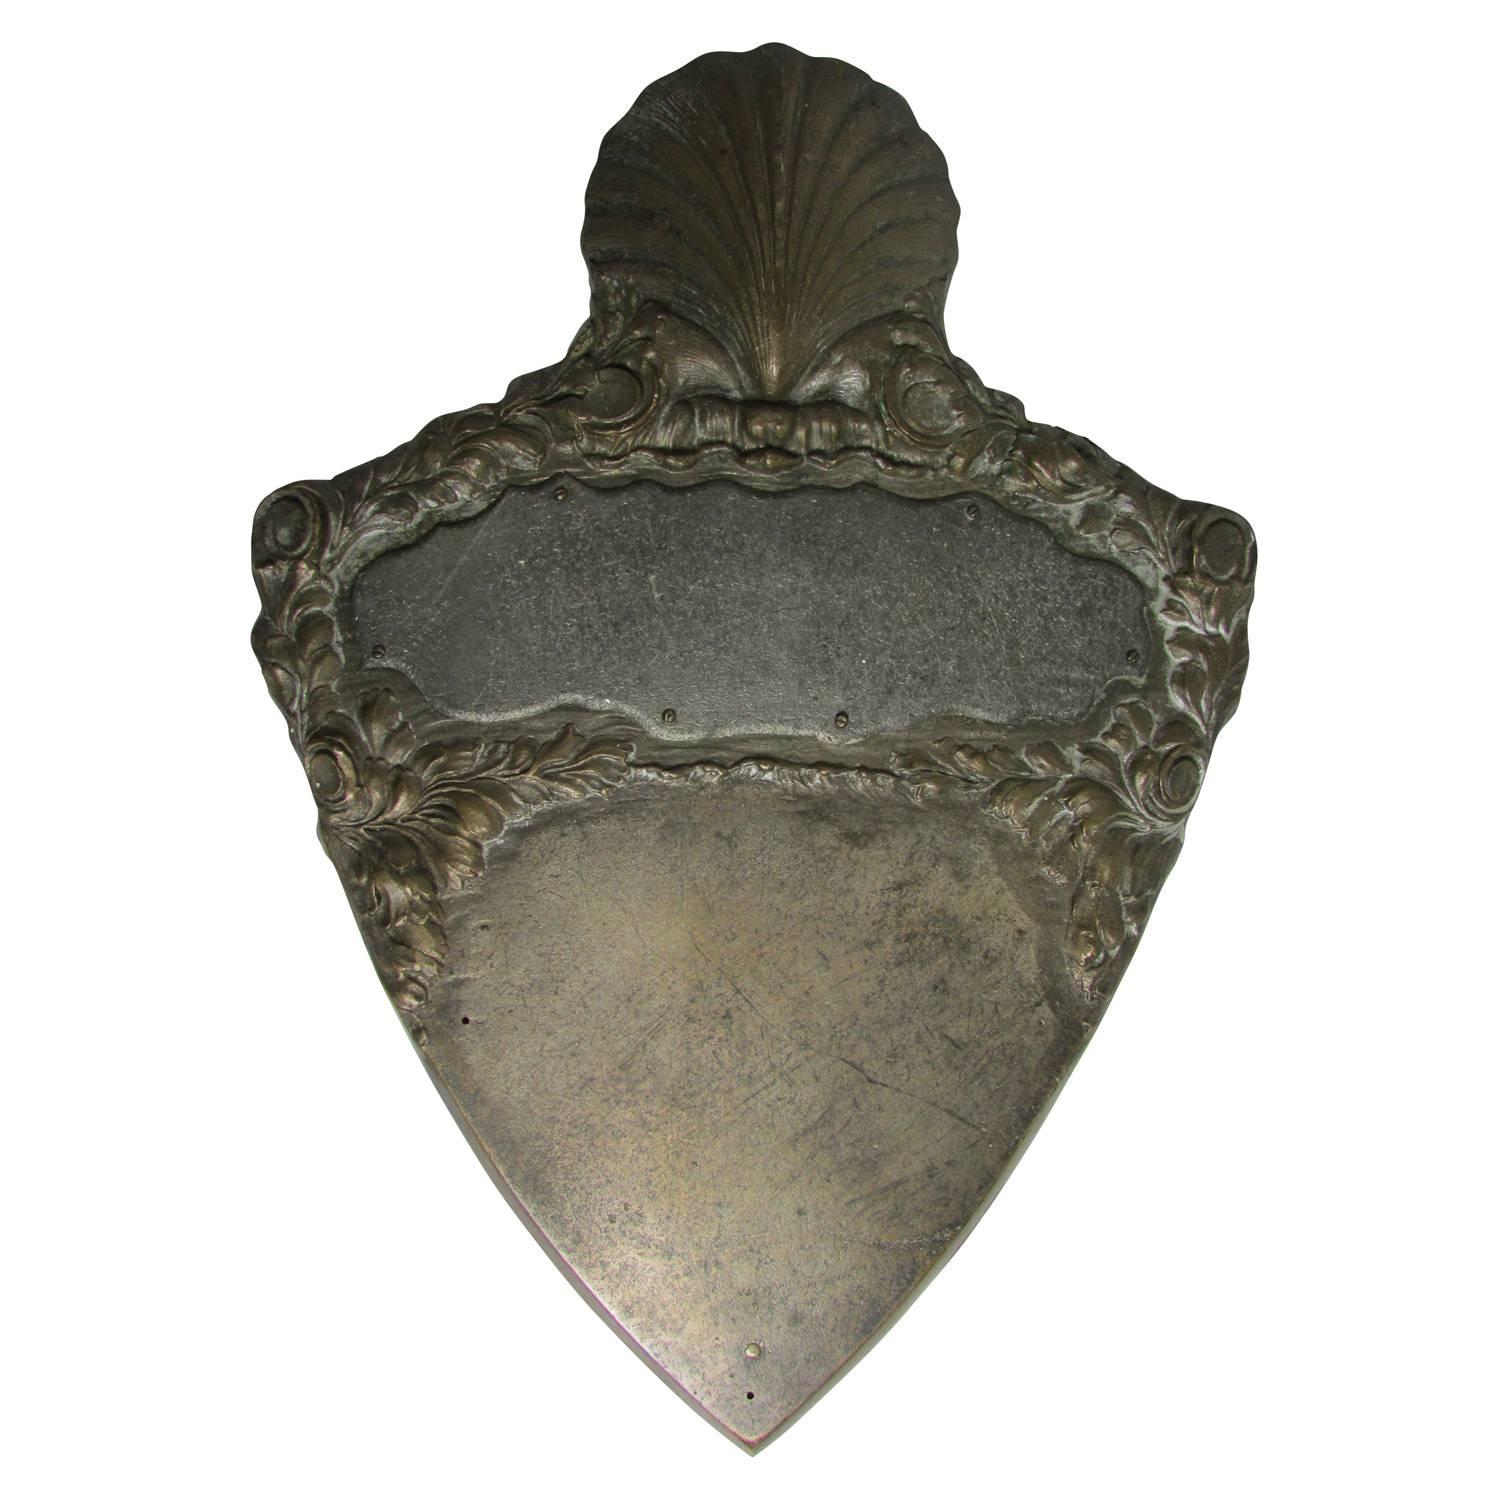 This is a lovely Victorian era shield shaped plaque that was never engraved. At the very top of the plaque is a seashell, beneath that are two blank slates for engraving.